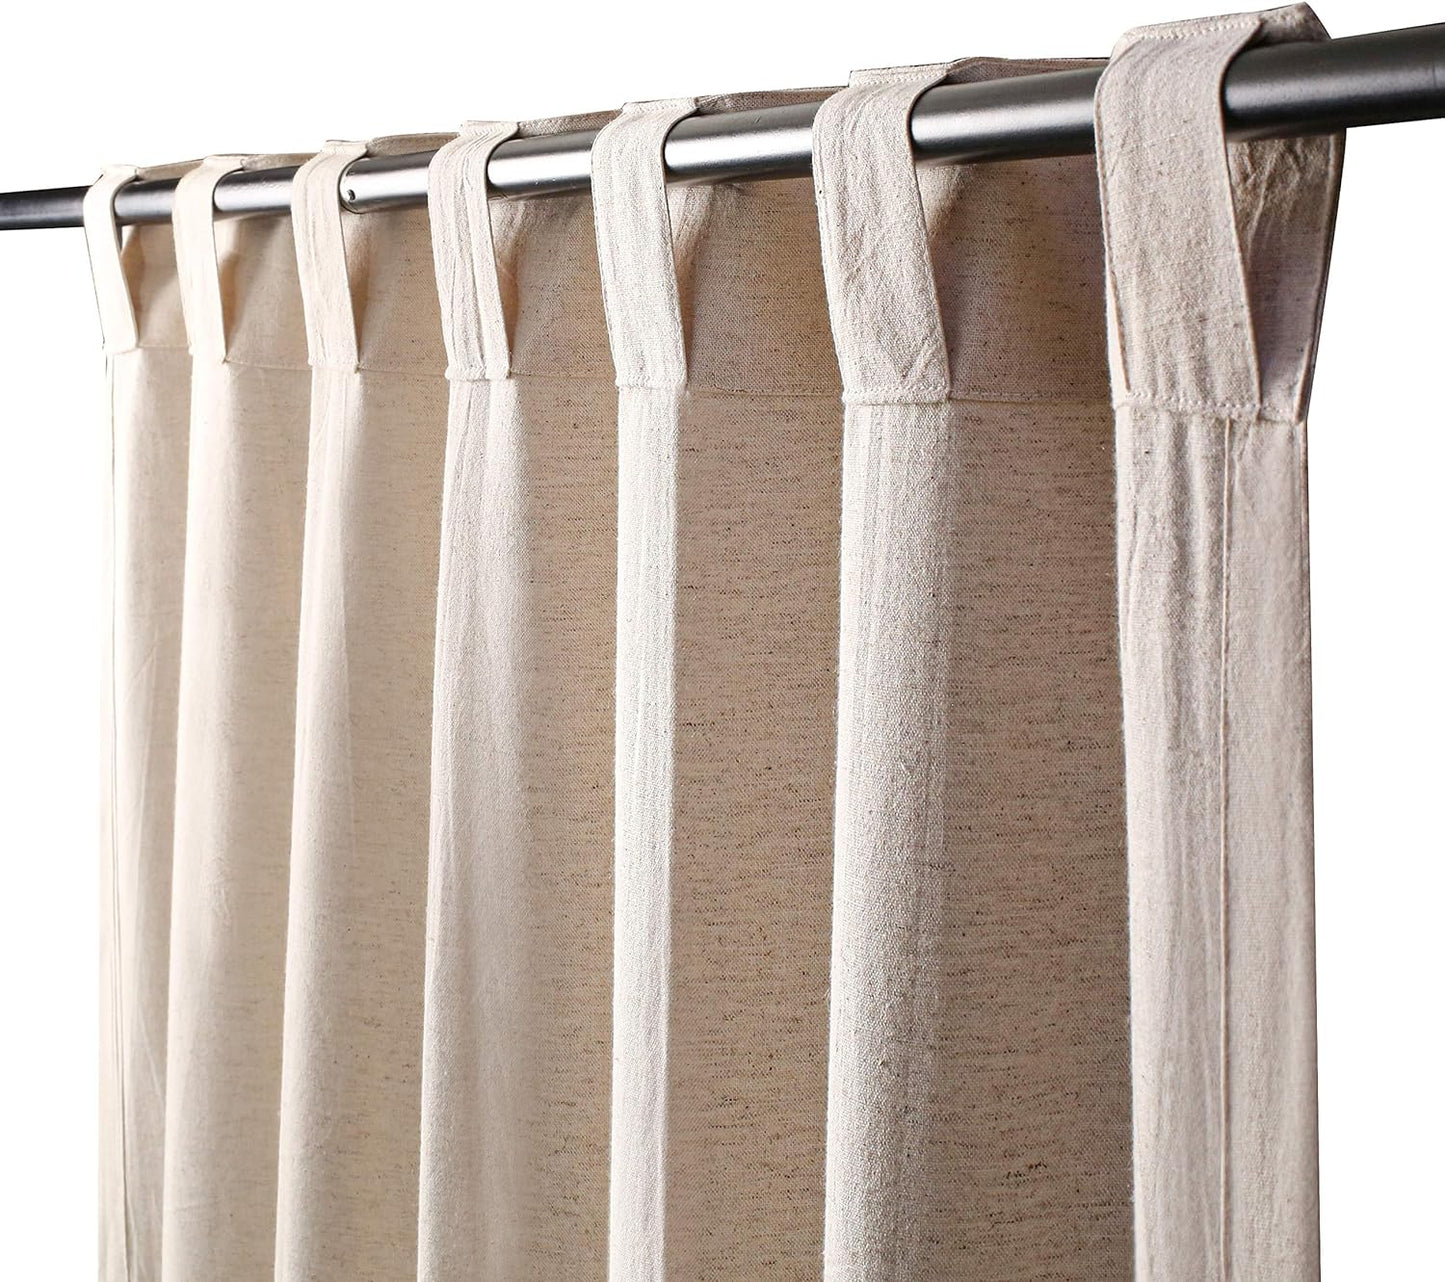 A&A Fabrics Farmhouse Curtains Tab Top Curtains Room Darkening Drapes, Window Panels in Natural 70% Cotton 30% Linen, There Are Drapes for the Kitchen, Living Room, Bedroom 1 Pair (Set of 2)(50X108)  A&A Fabrics   